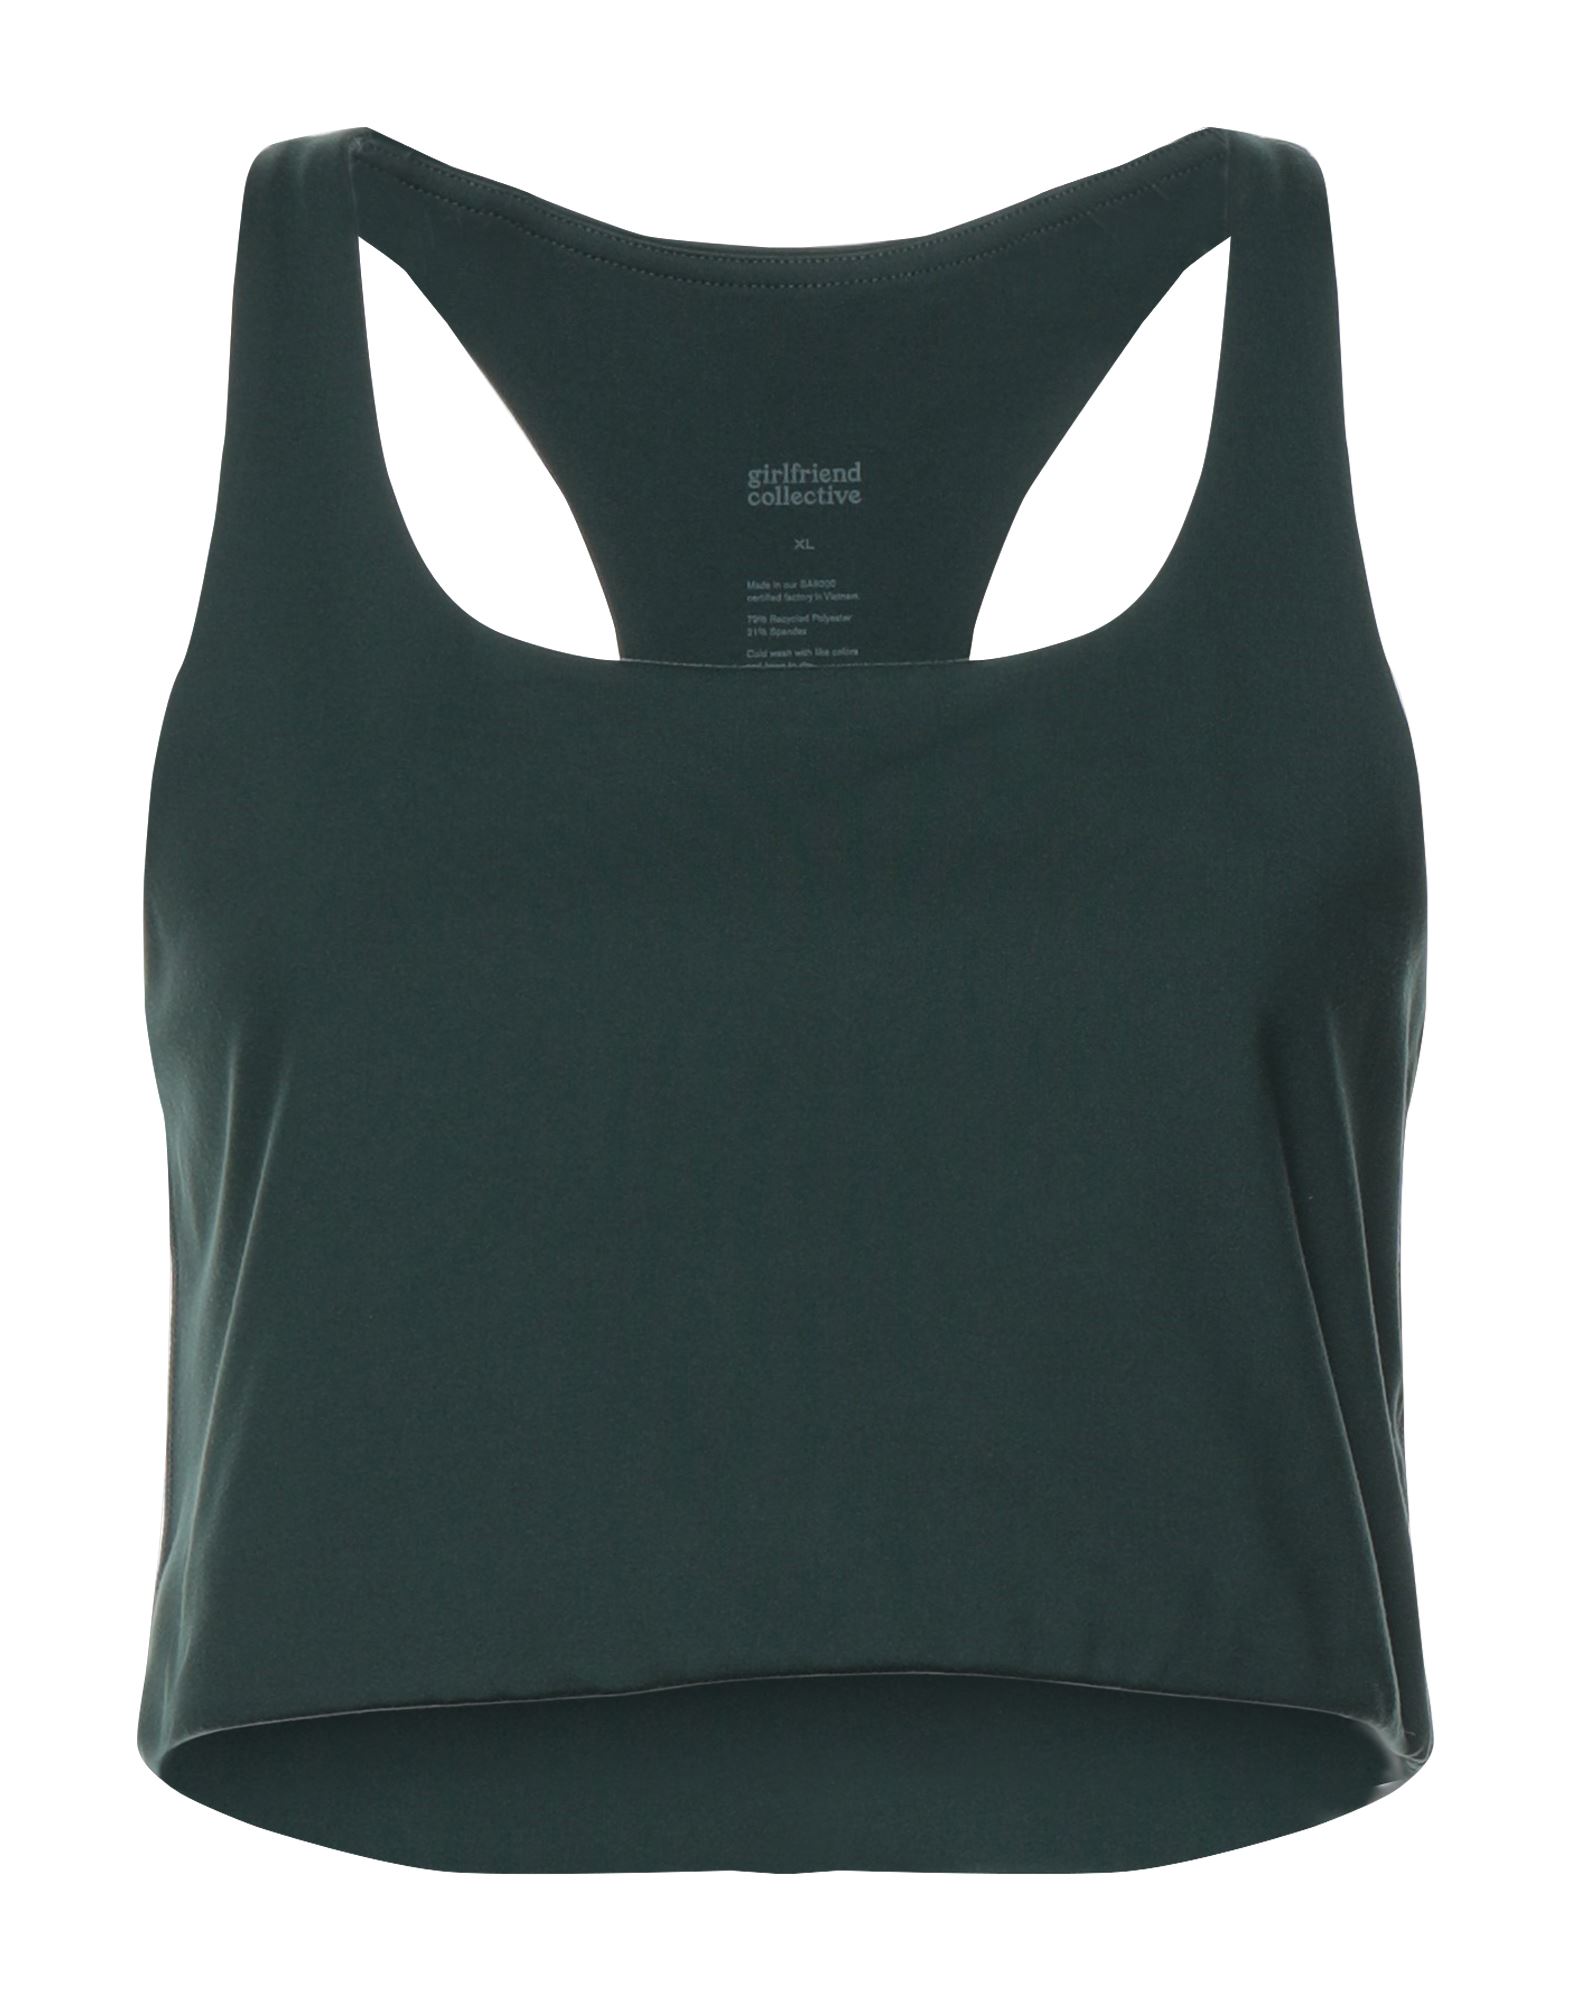 Girlfriend Collective Tops In Green